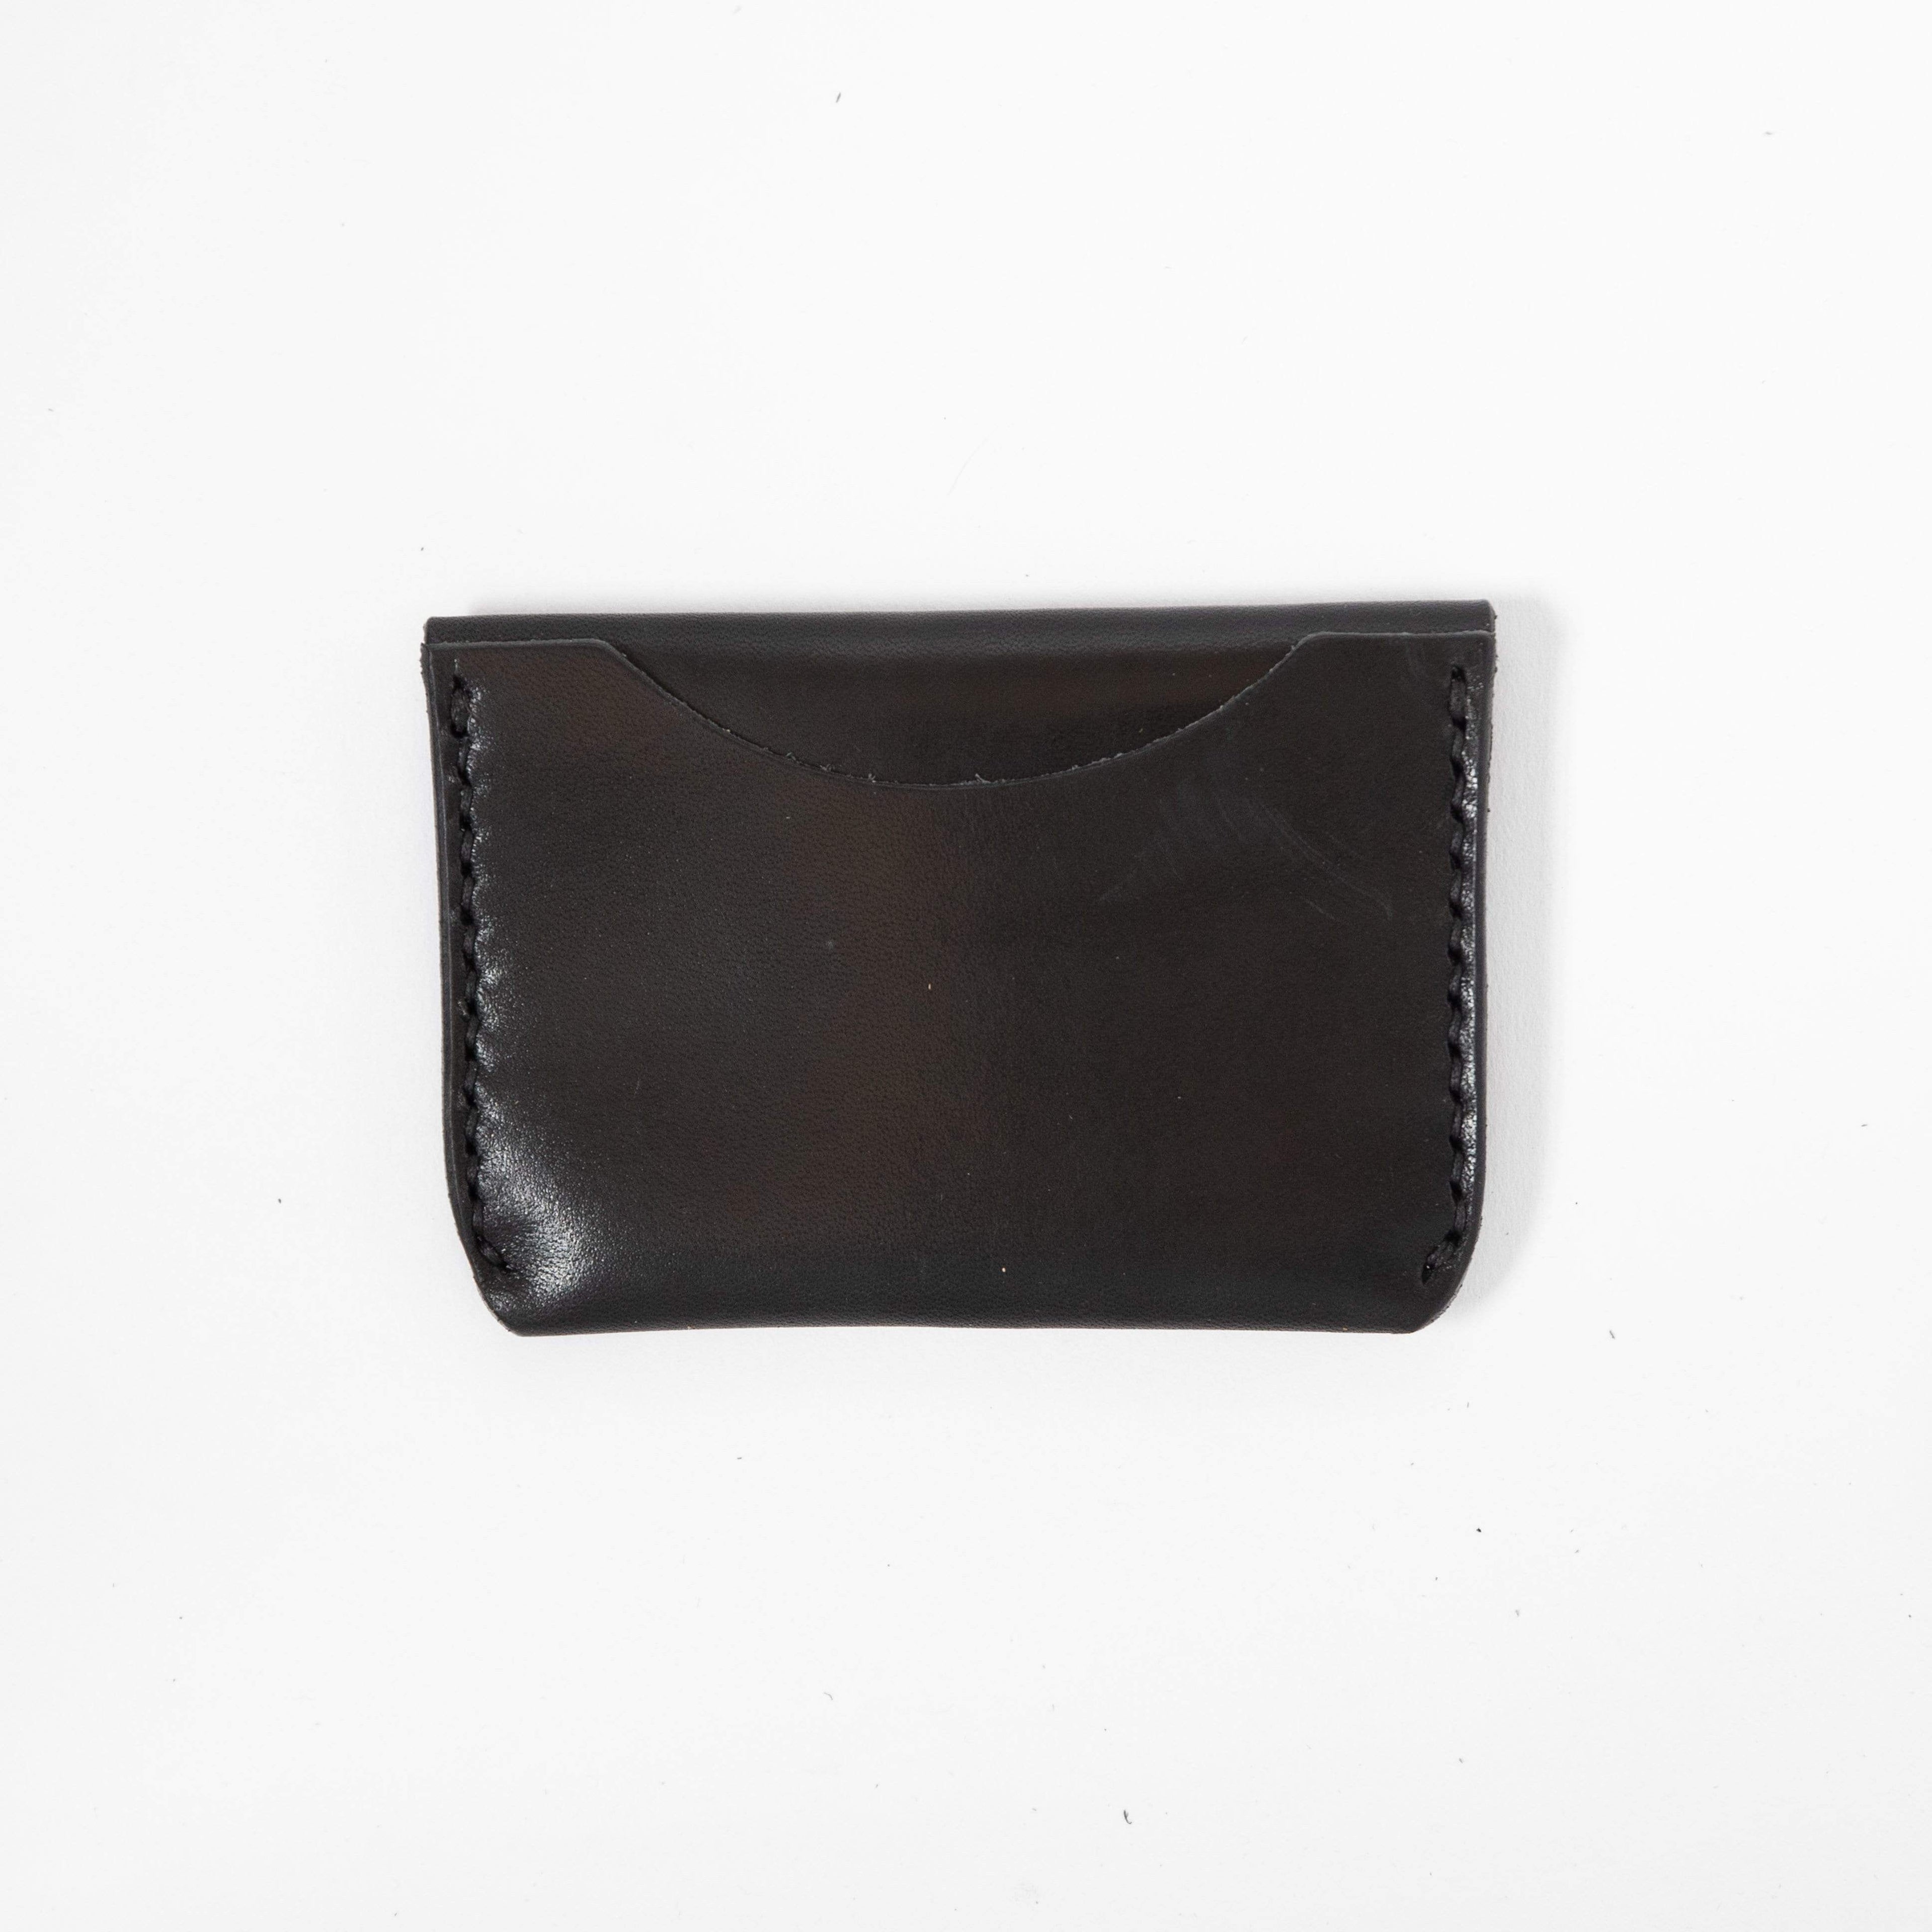 Large Aren Embossed Patent Leather Wallet